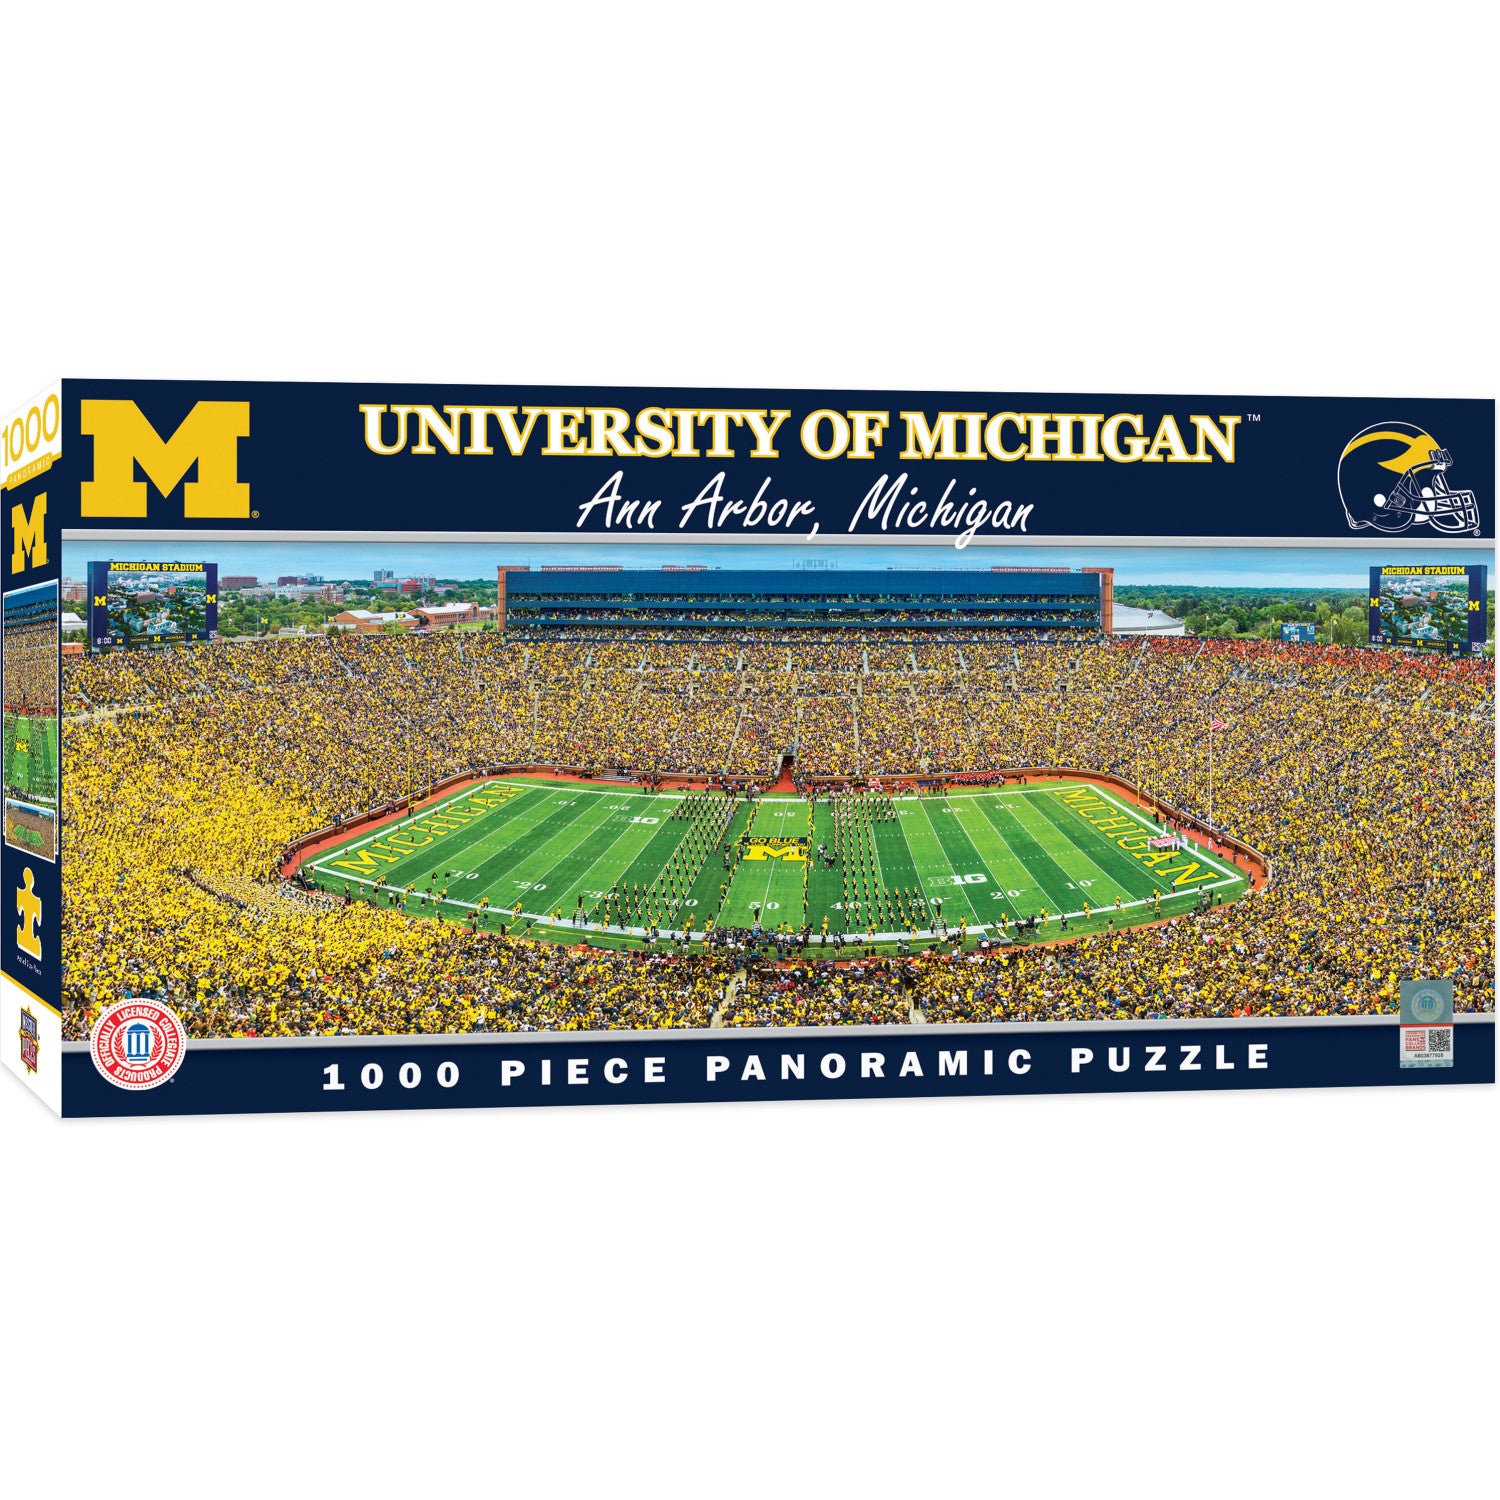 Michigan Wolverines - 1000 Piece Panoramic Jigsaw Puzzle - Center View